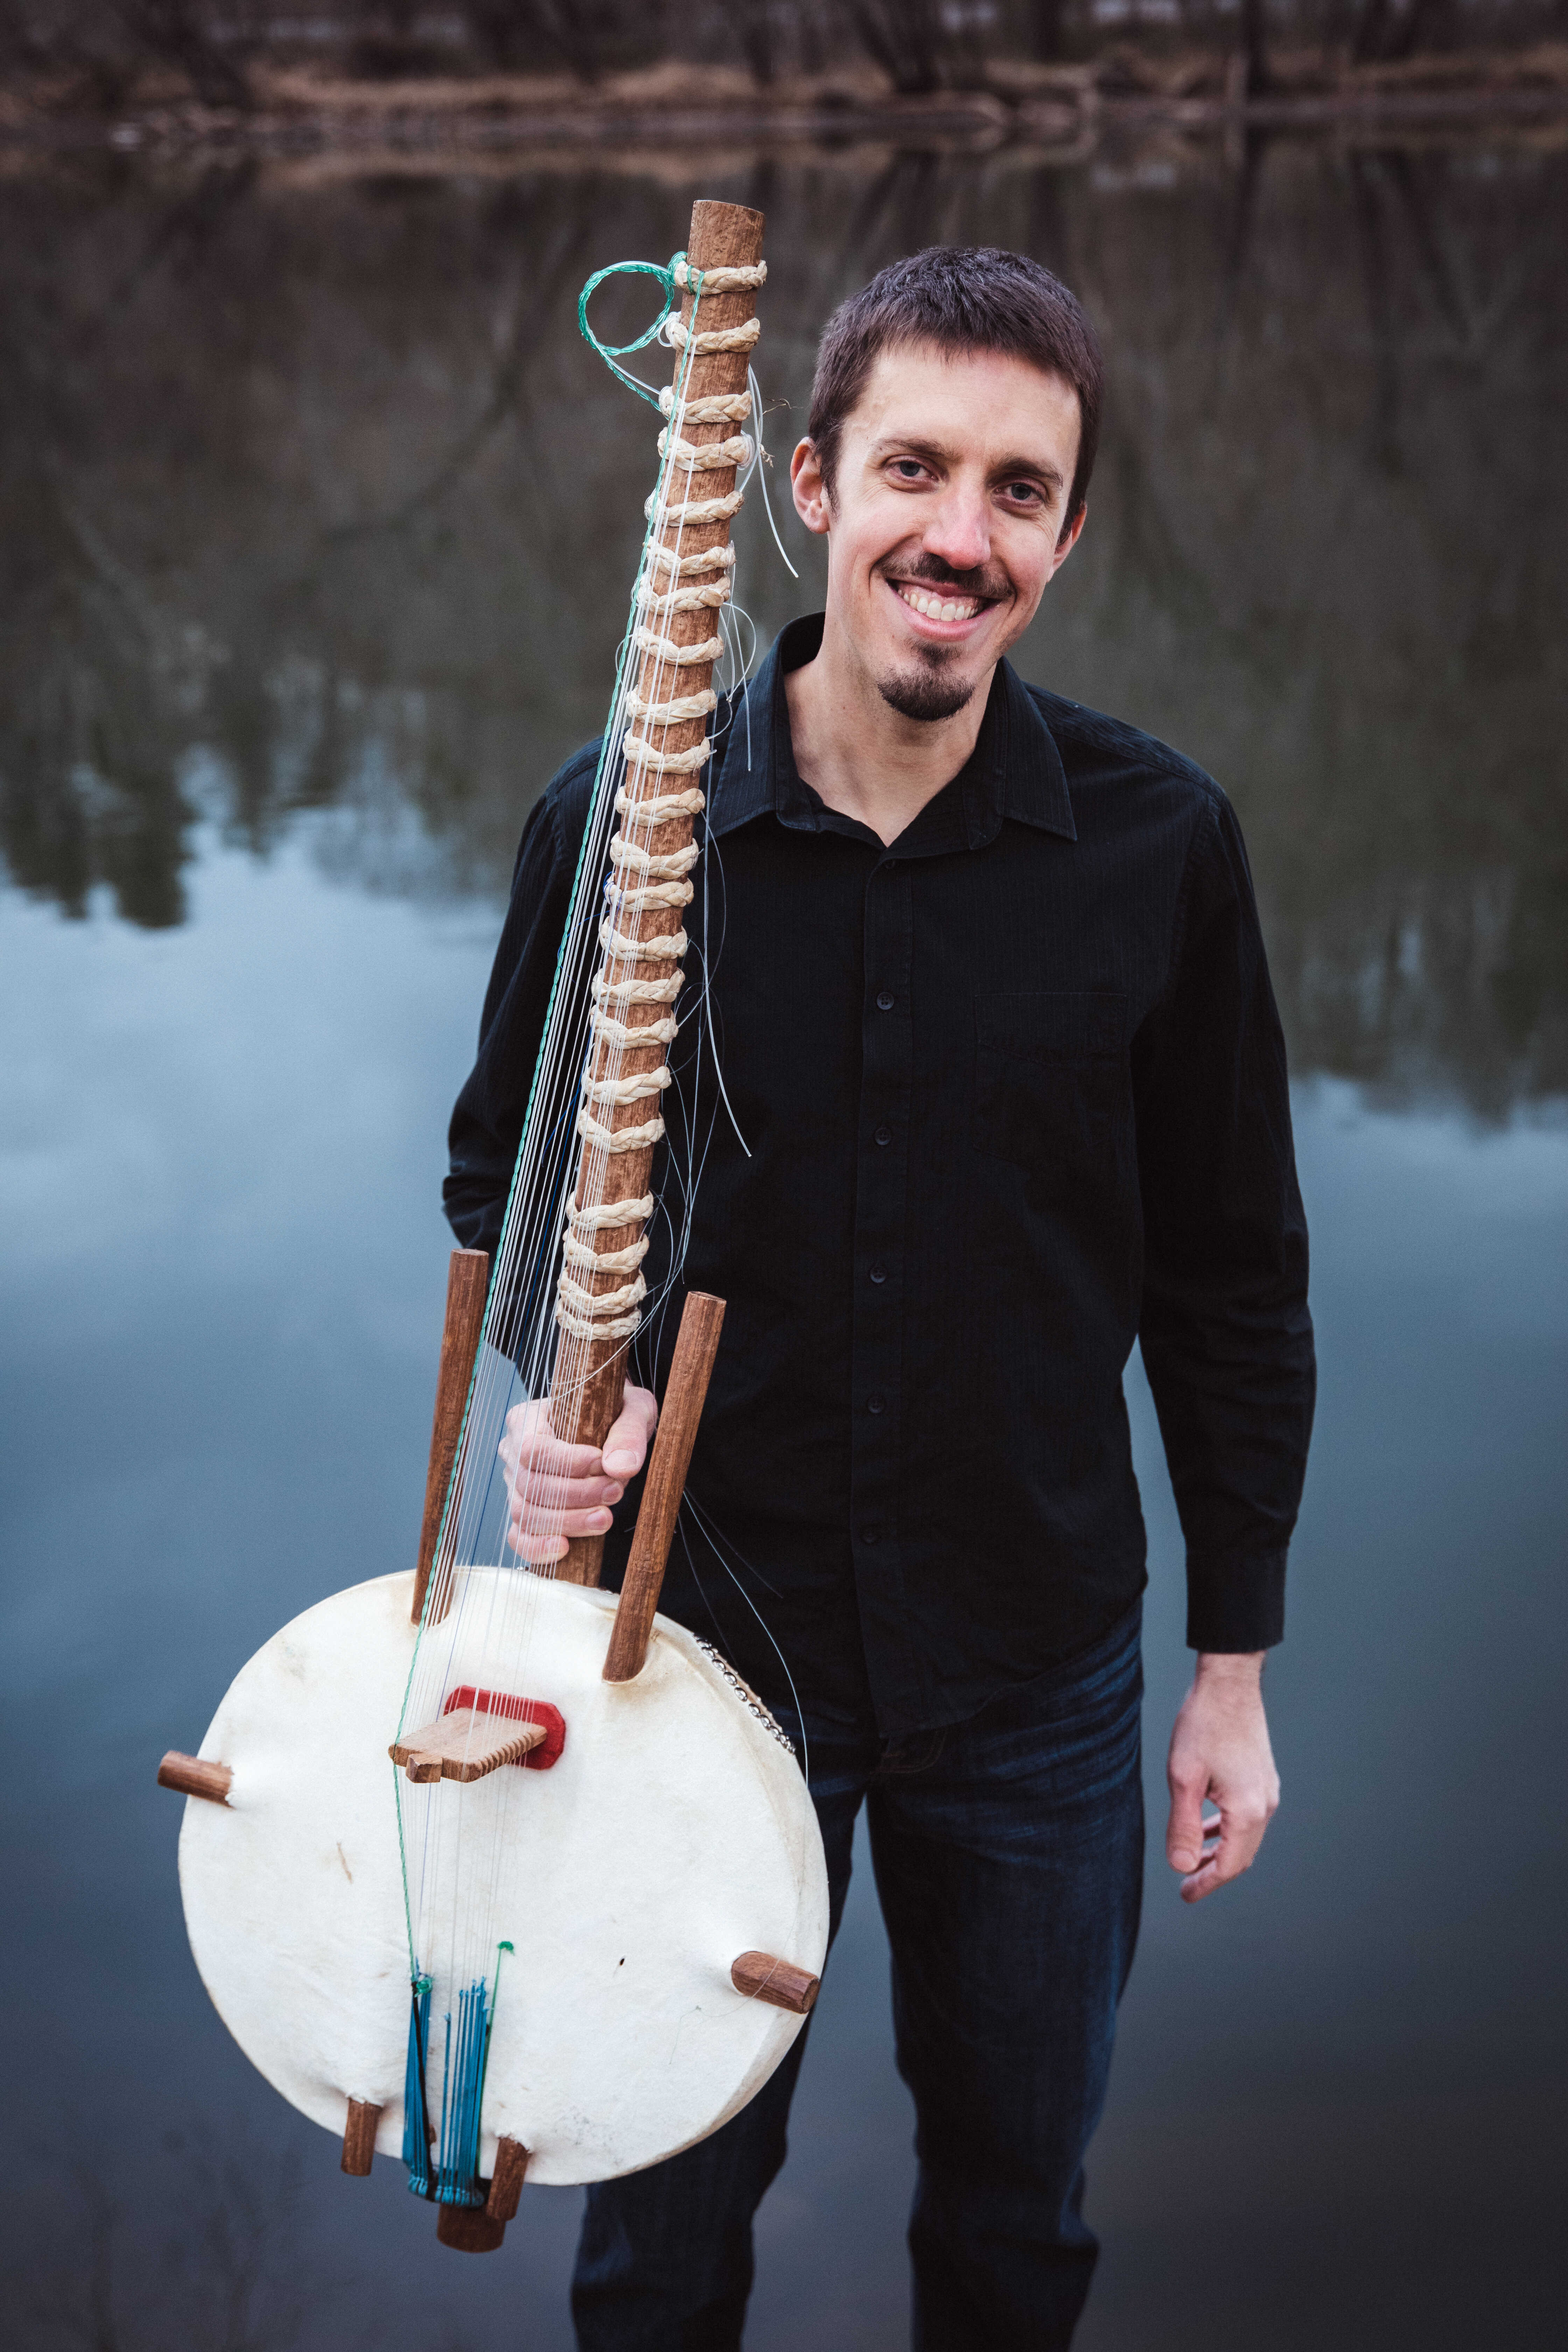 Sean Gaskell will perform on the West African kora